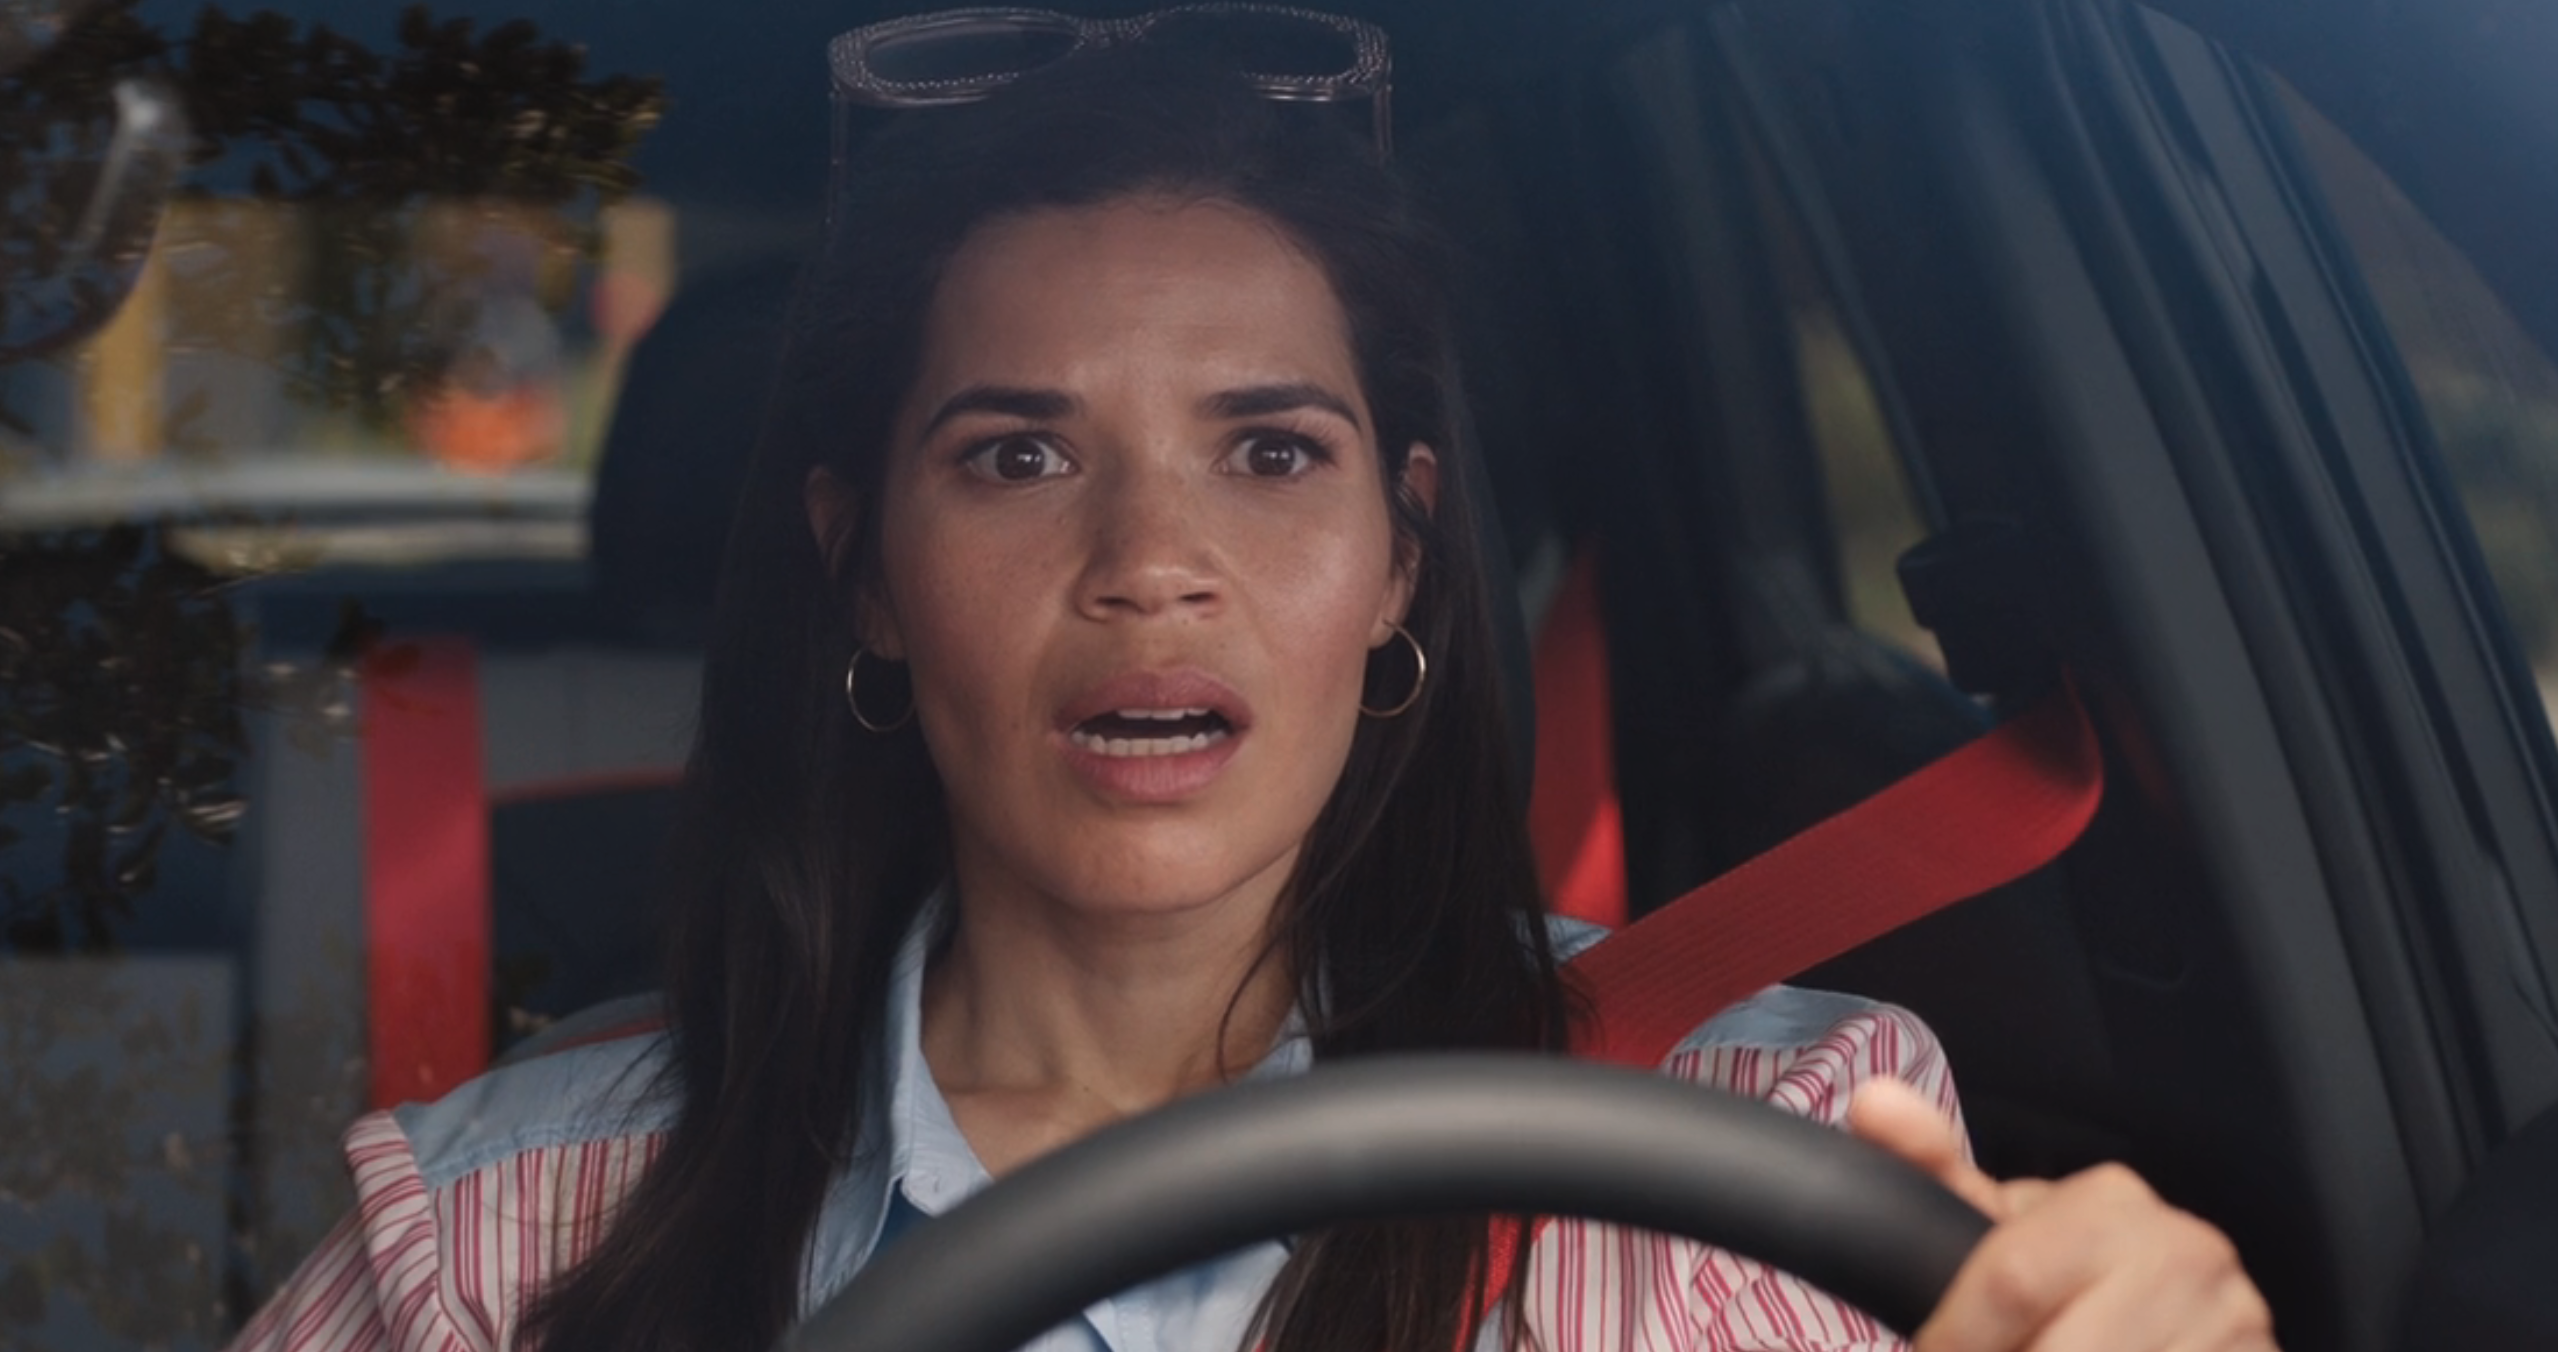 America Ferrera in Barbie, sitting in a car and looking shocked